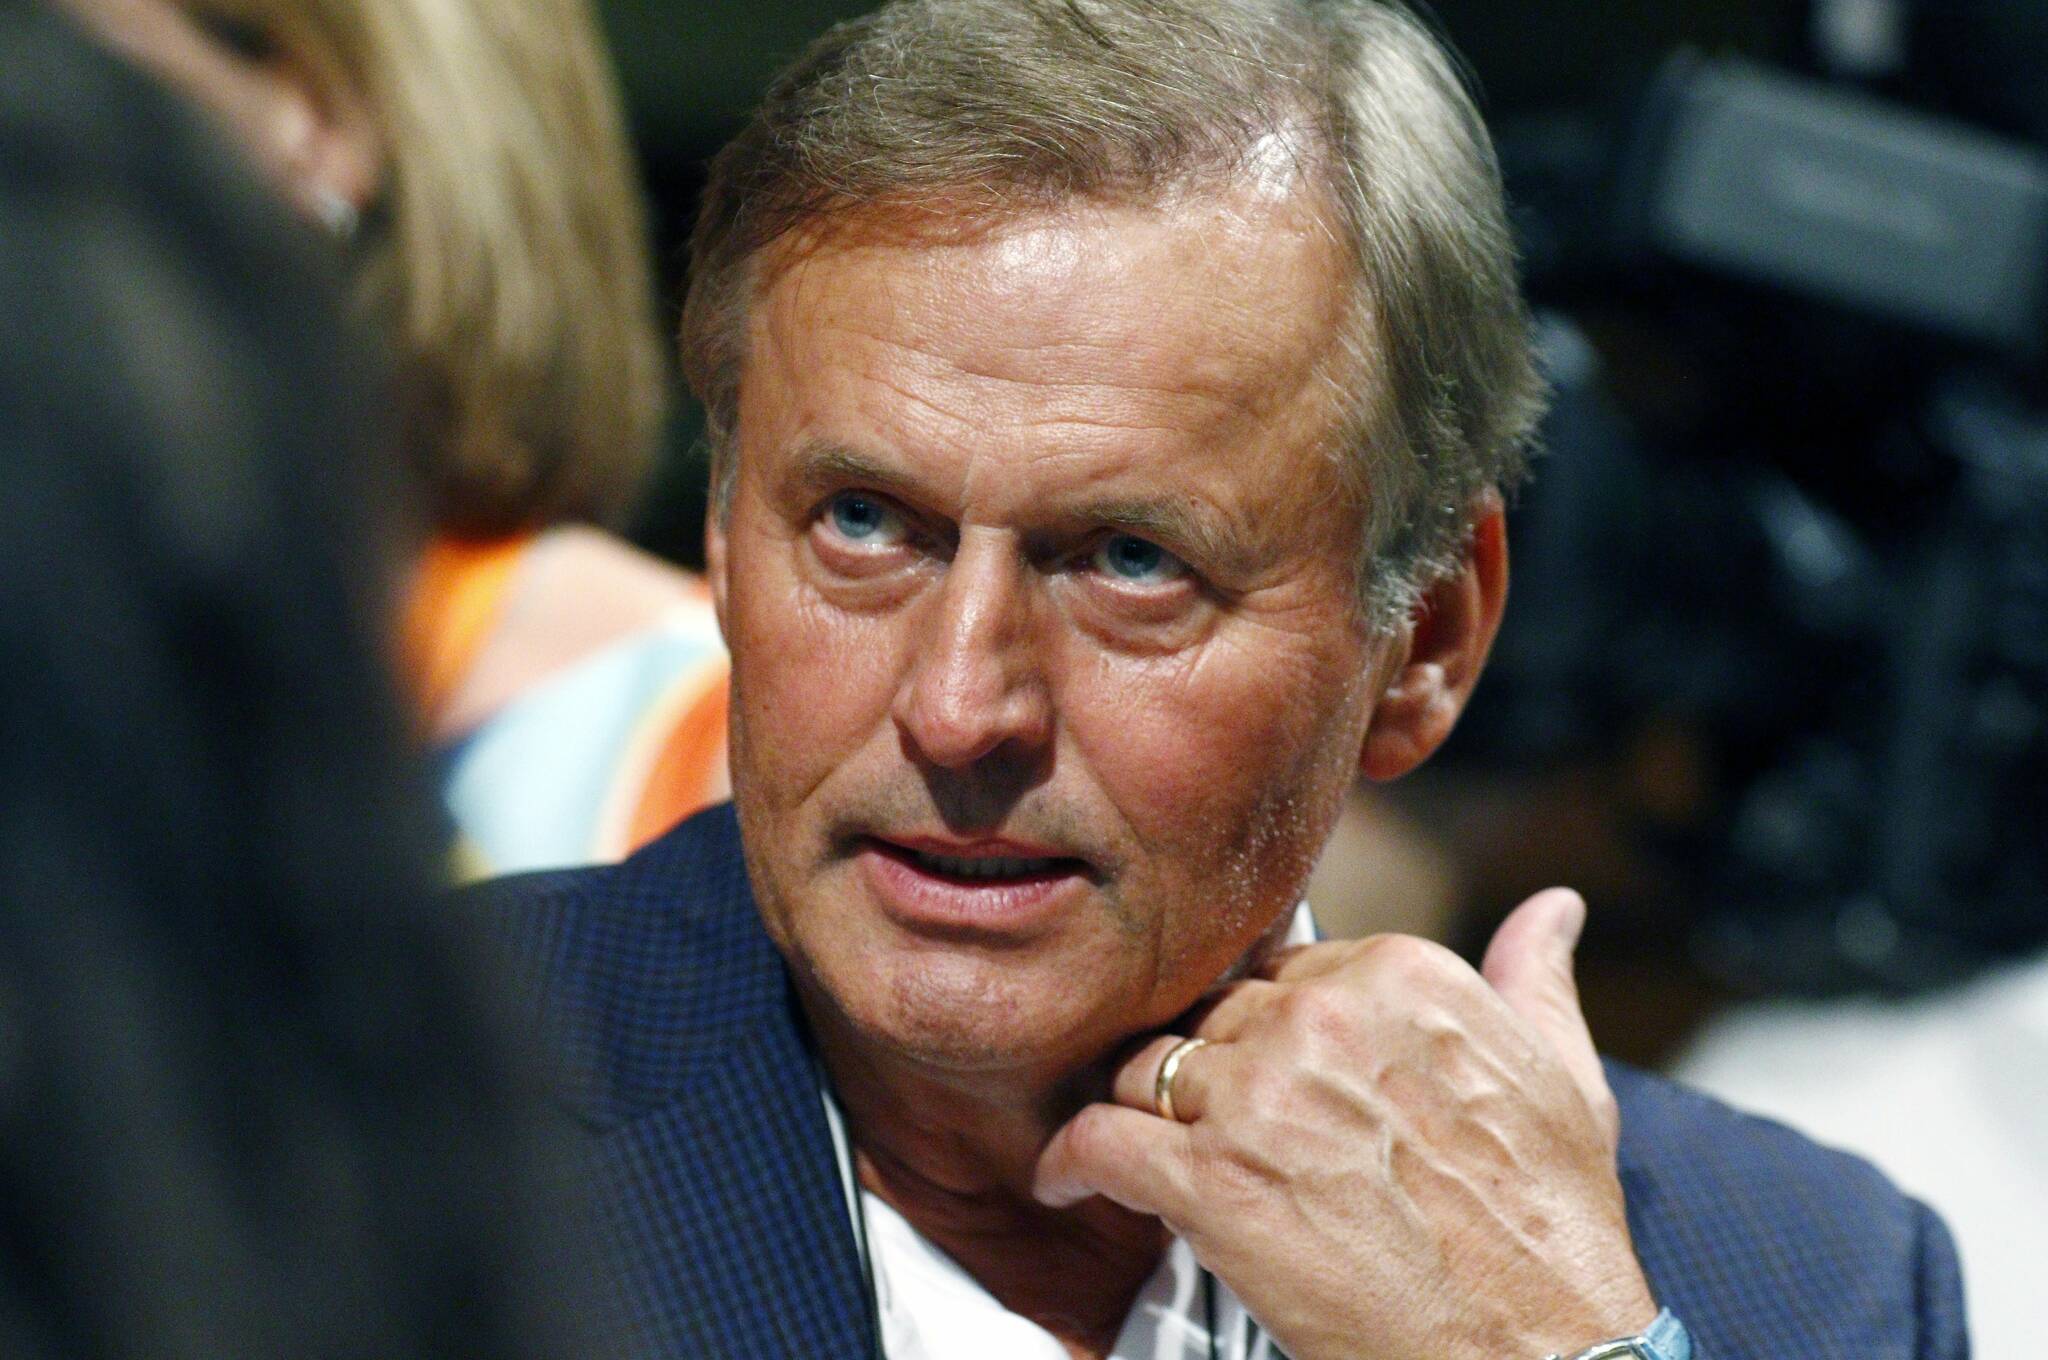 FILE - In this Saturday, Aug. 22, 2015 file photo, best selling author John Grisham speaks to an attendee of the Mississippi Book Festival, at Galloway Methodist Church Sanctuary in Jackson, Miss. (AP Photo/Rogelio V. Solis, File)